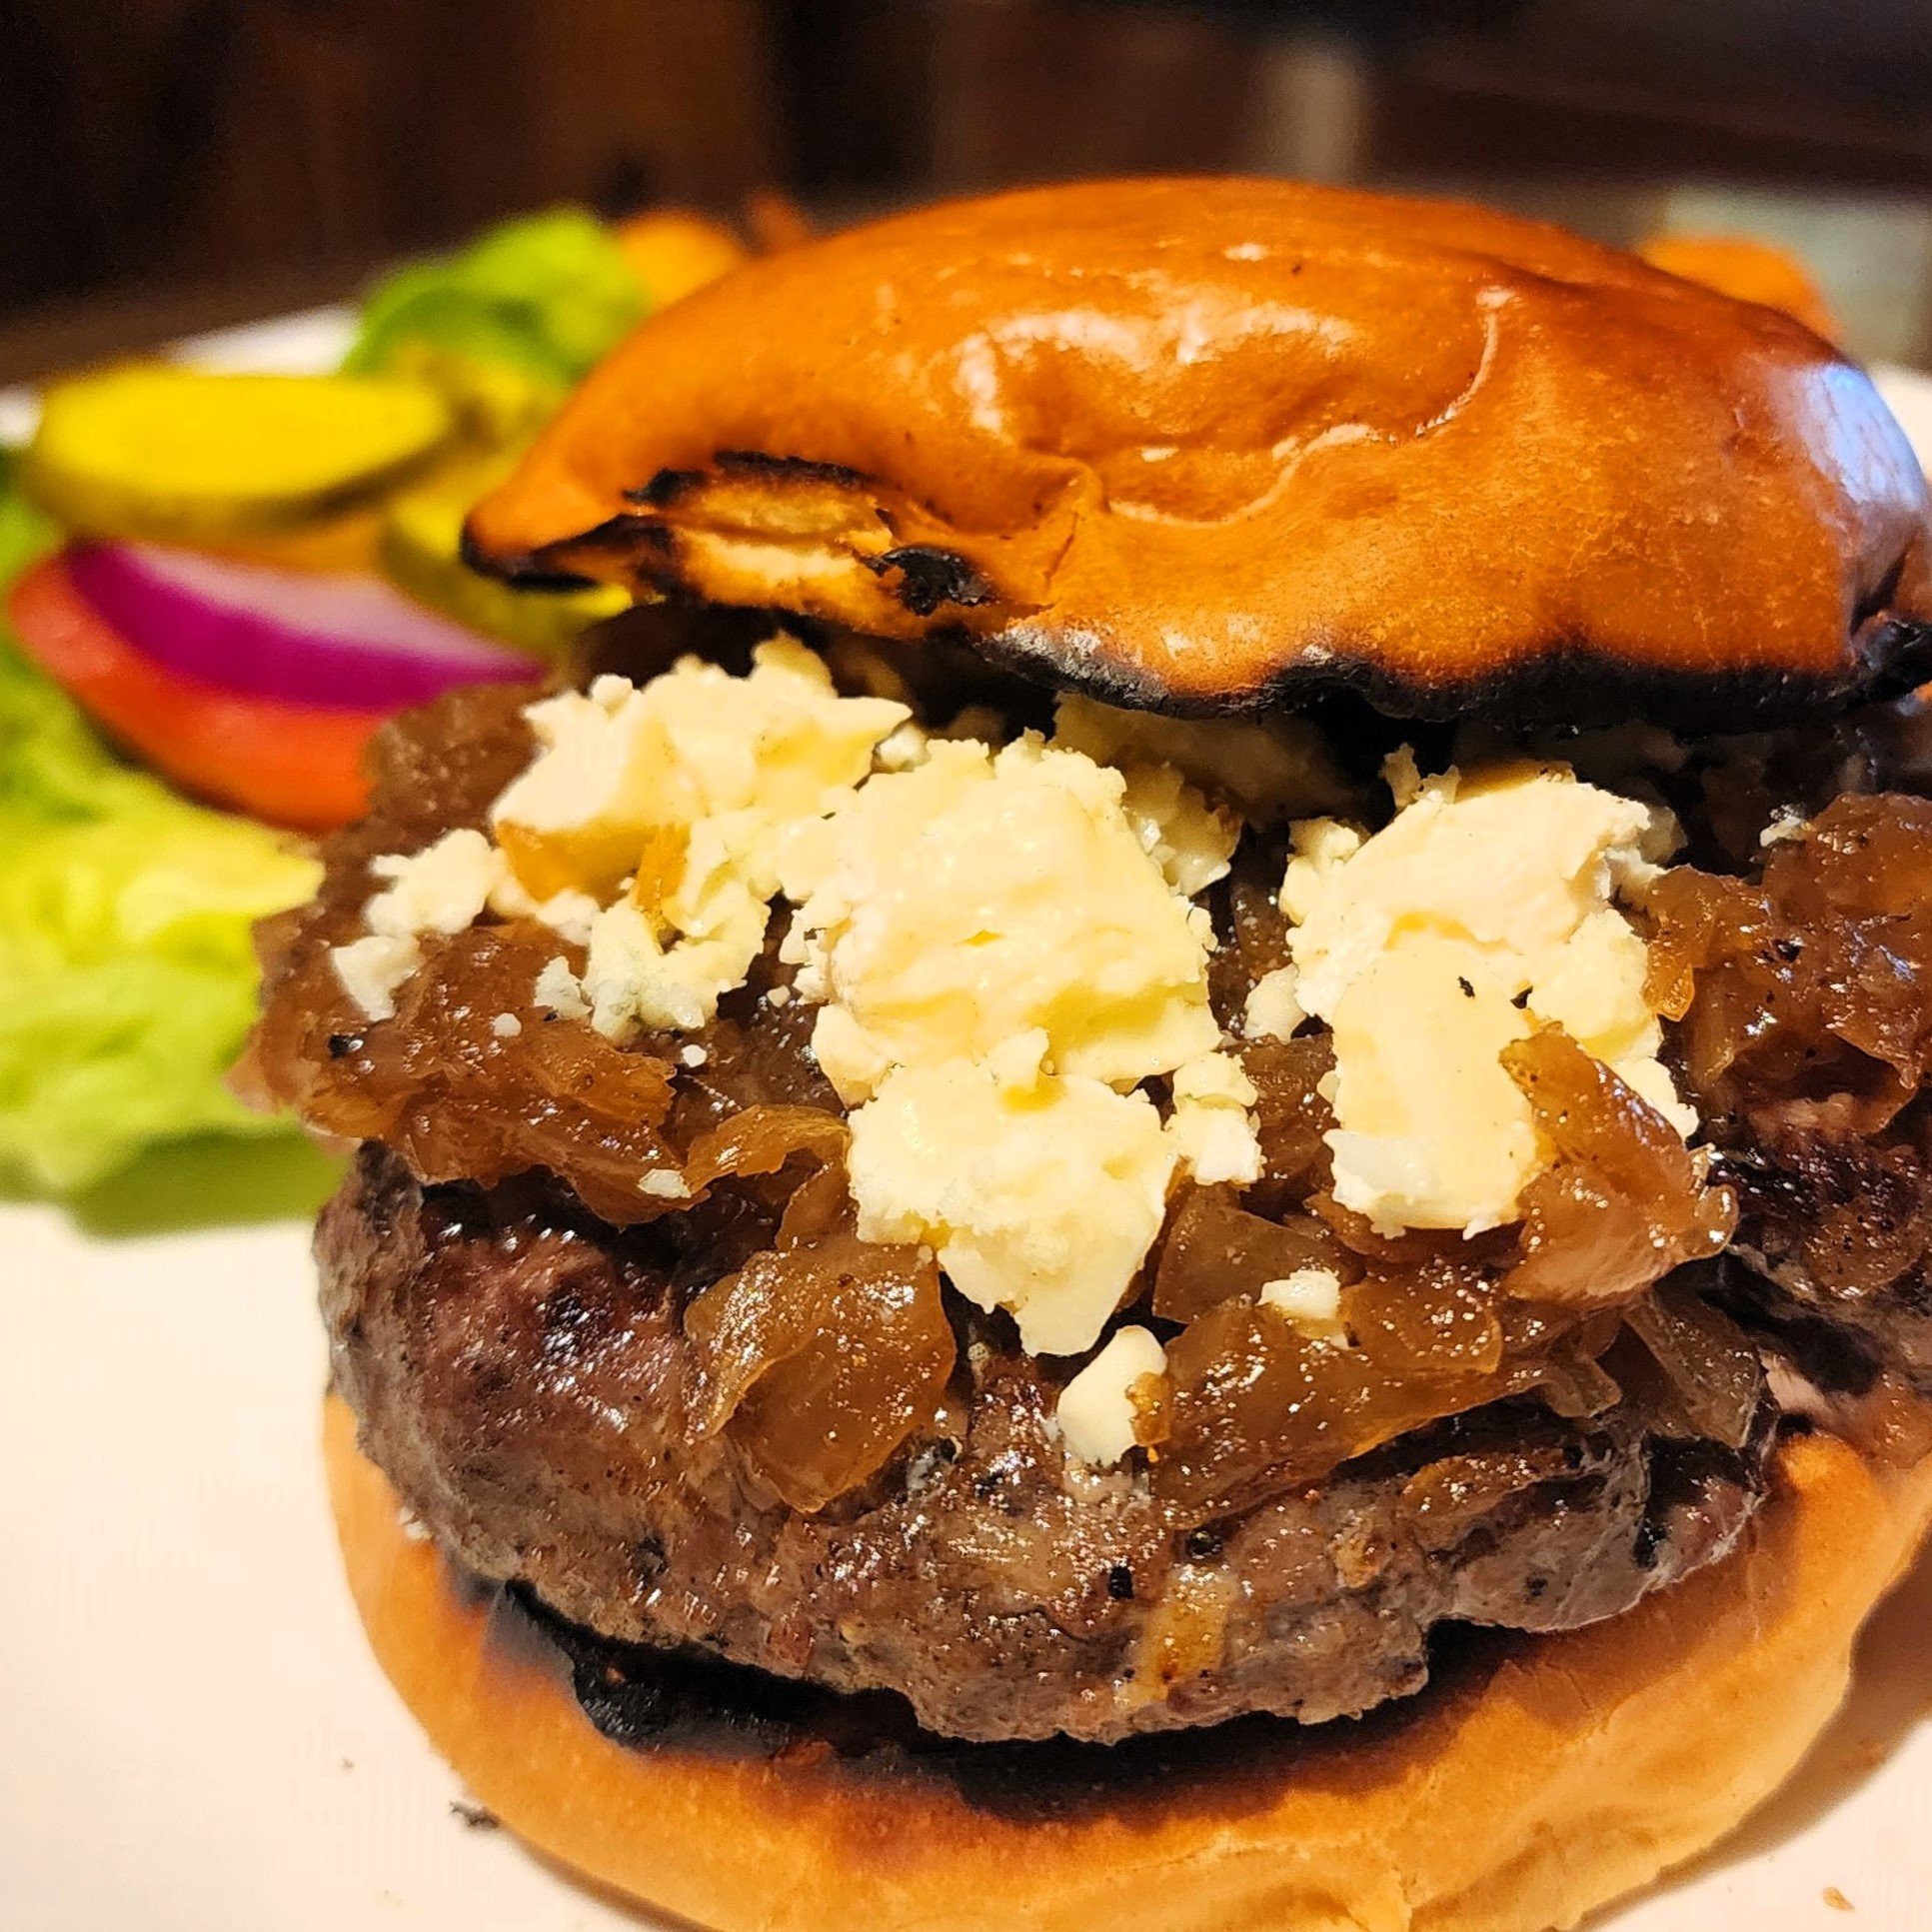 Something new for #burgerFriday. Smoked onions and blue cheese on our famous #wildgame burger this Friday at lunch while they last. Still only $15! Book a table now at rainbow-lodge.com.